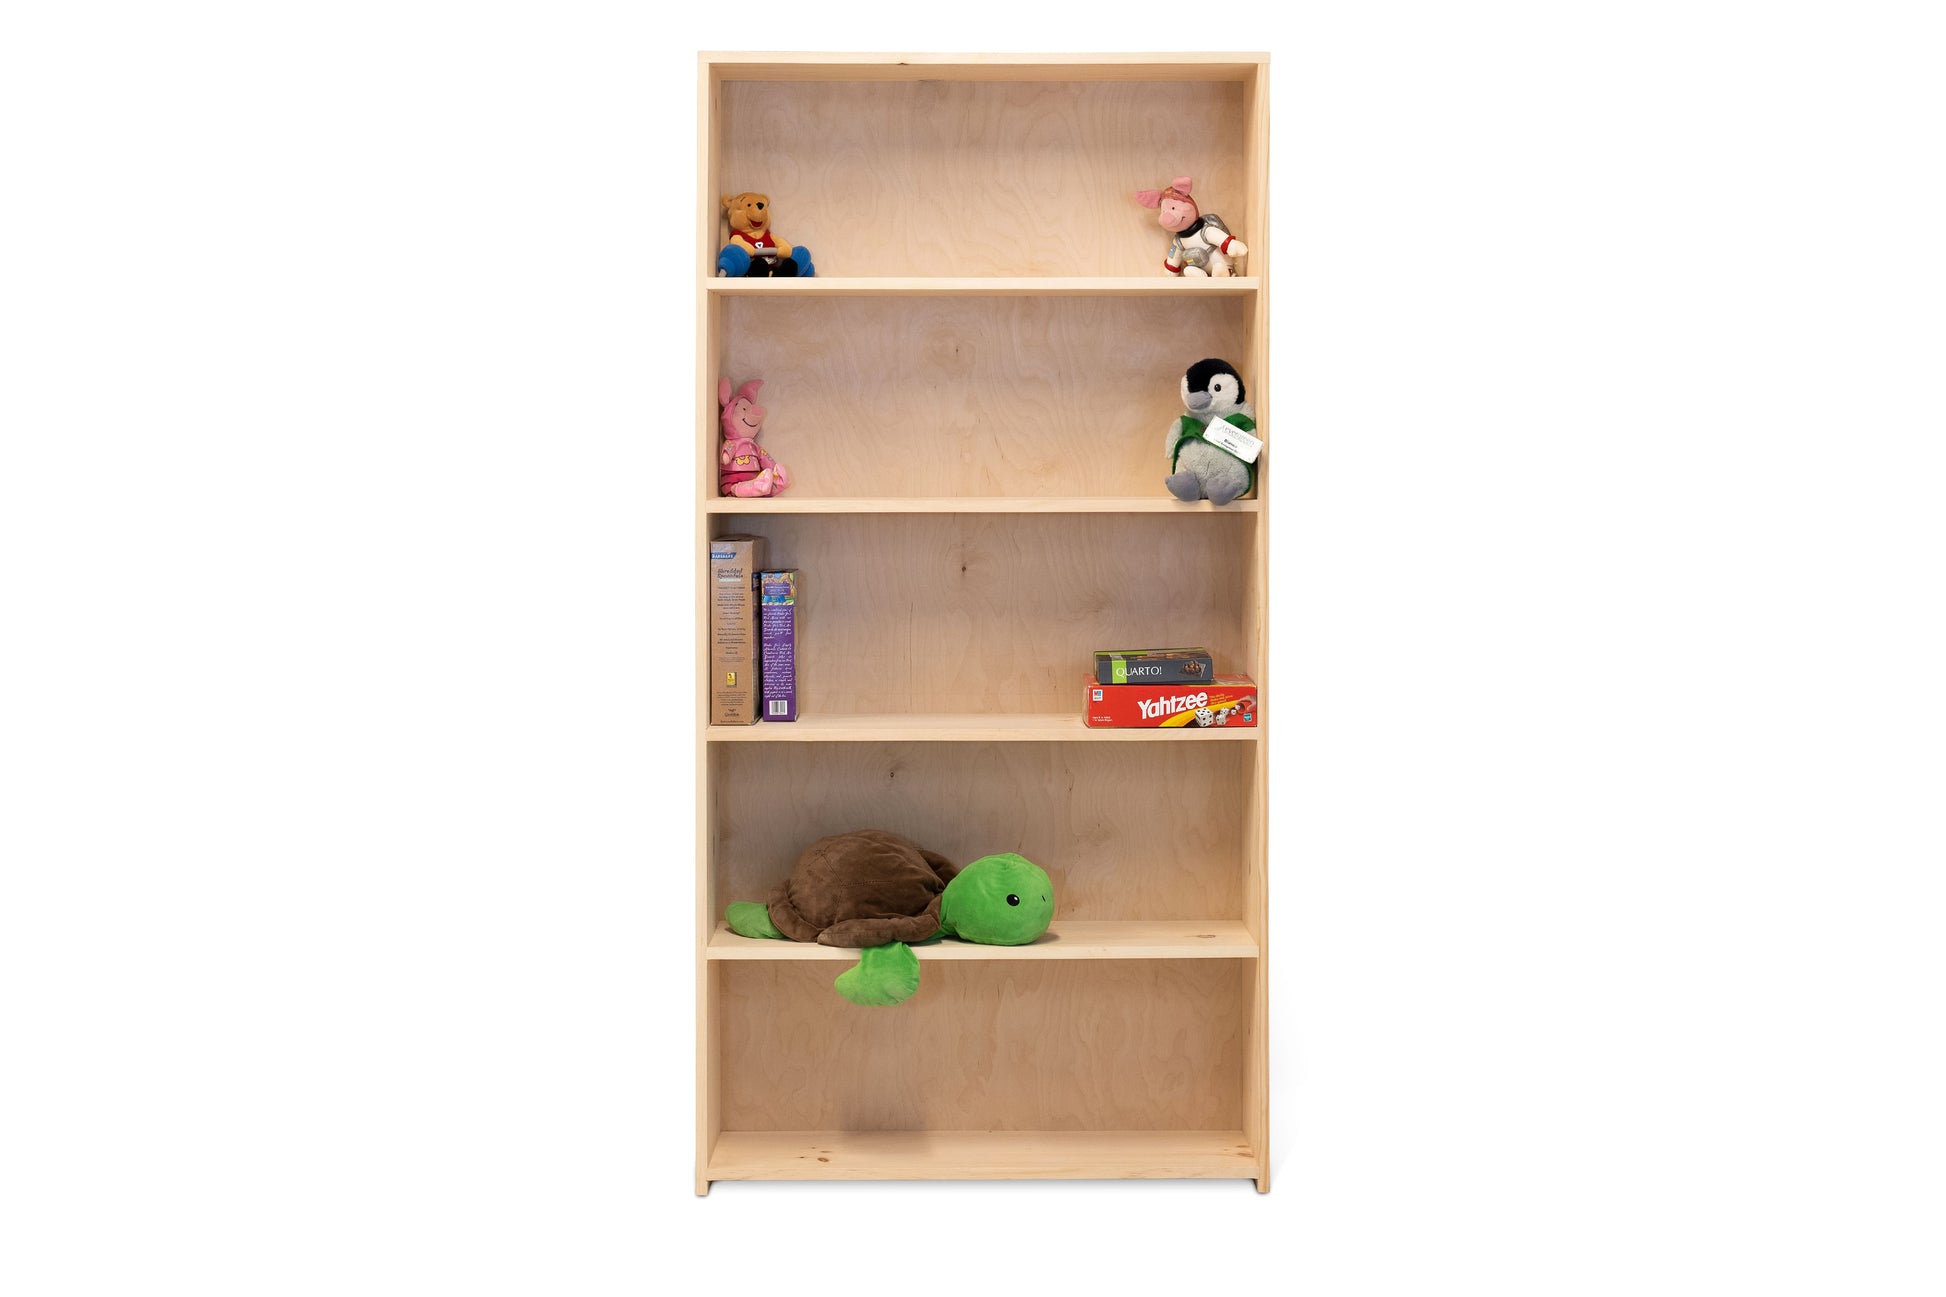 Evergreen Bookcase Shown unfinished and with items on the shelves.